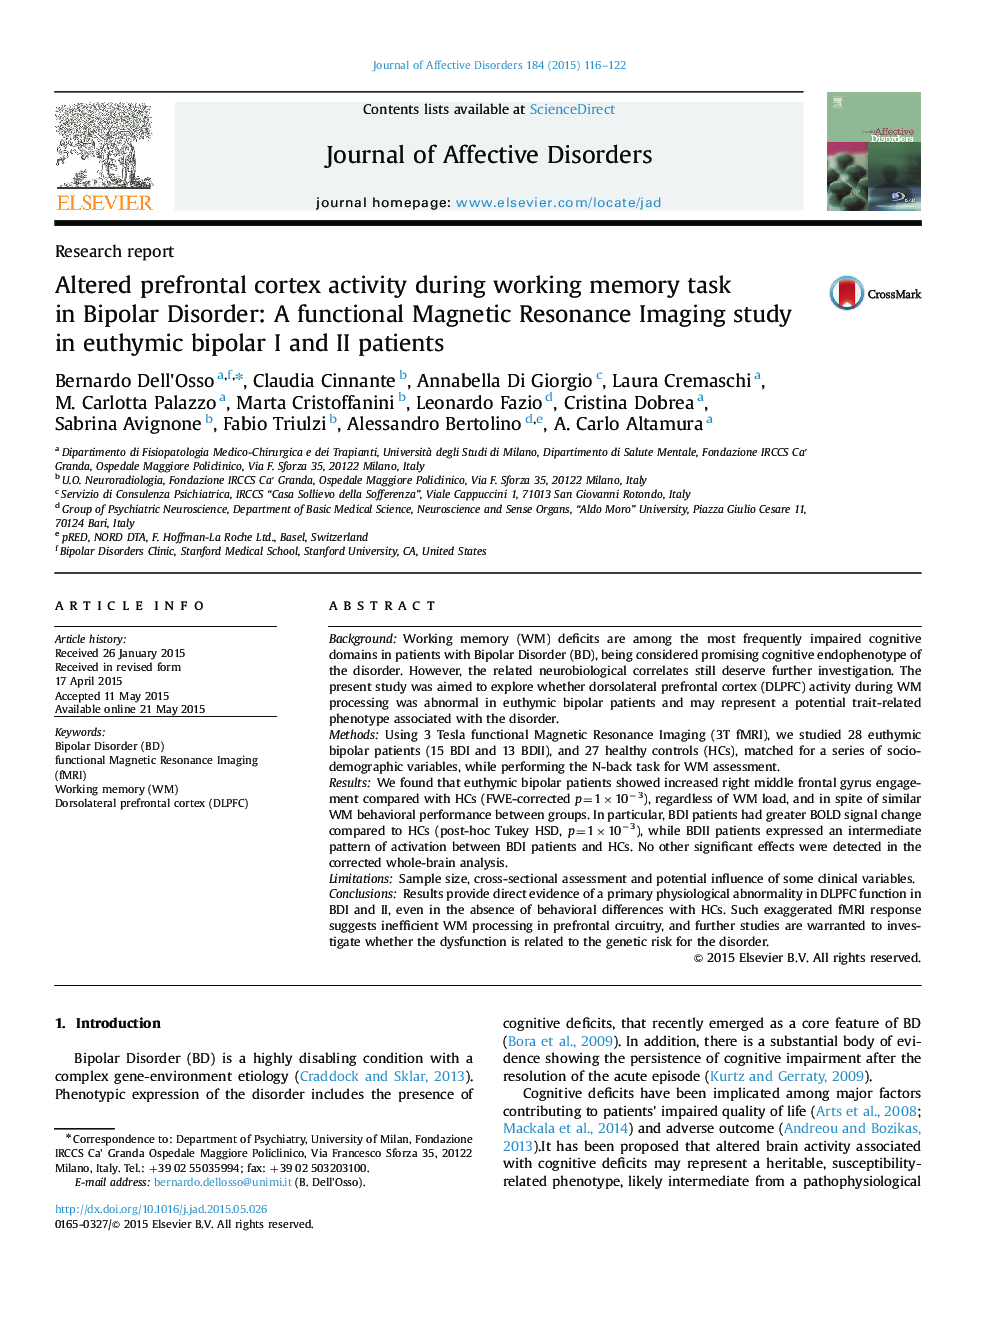 Altered prefrontal cortex activity during working memory task in Bipolar Disorder: A functional Magnetic Resonance Imaging study in euthymic bipolar I and II patients